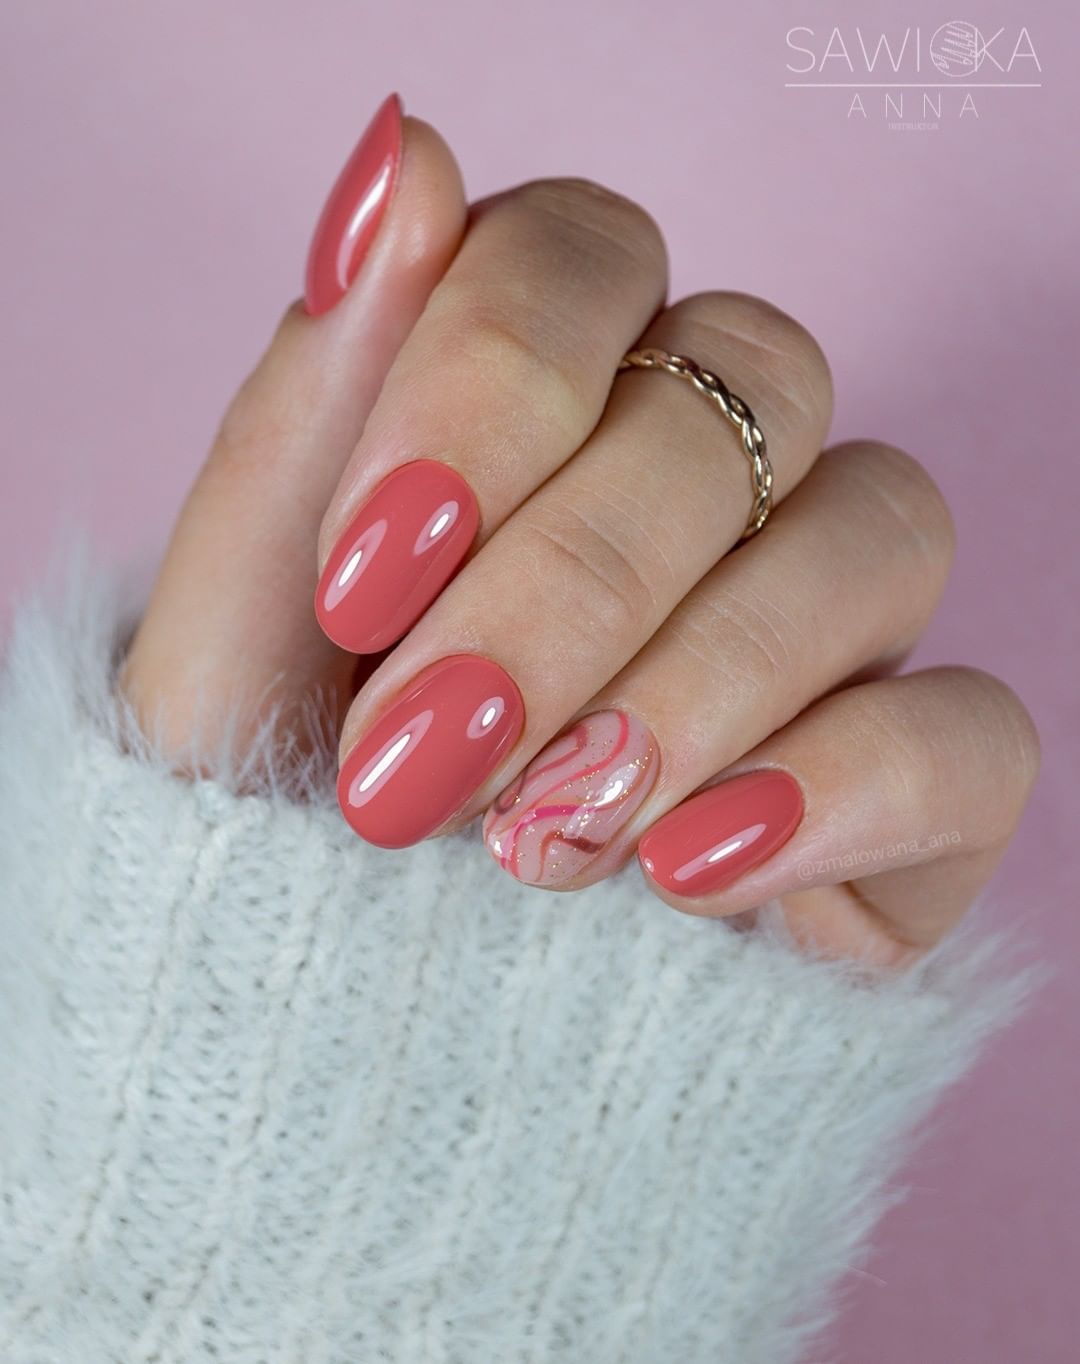 This pale shade of orange is perfect especially for winter. If you think that the color of the nail polish is too pale for you, you can have an accent nail which is full of swirls and glitters.